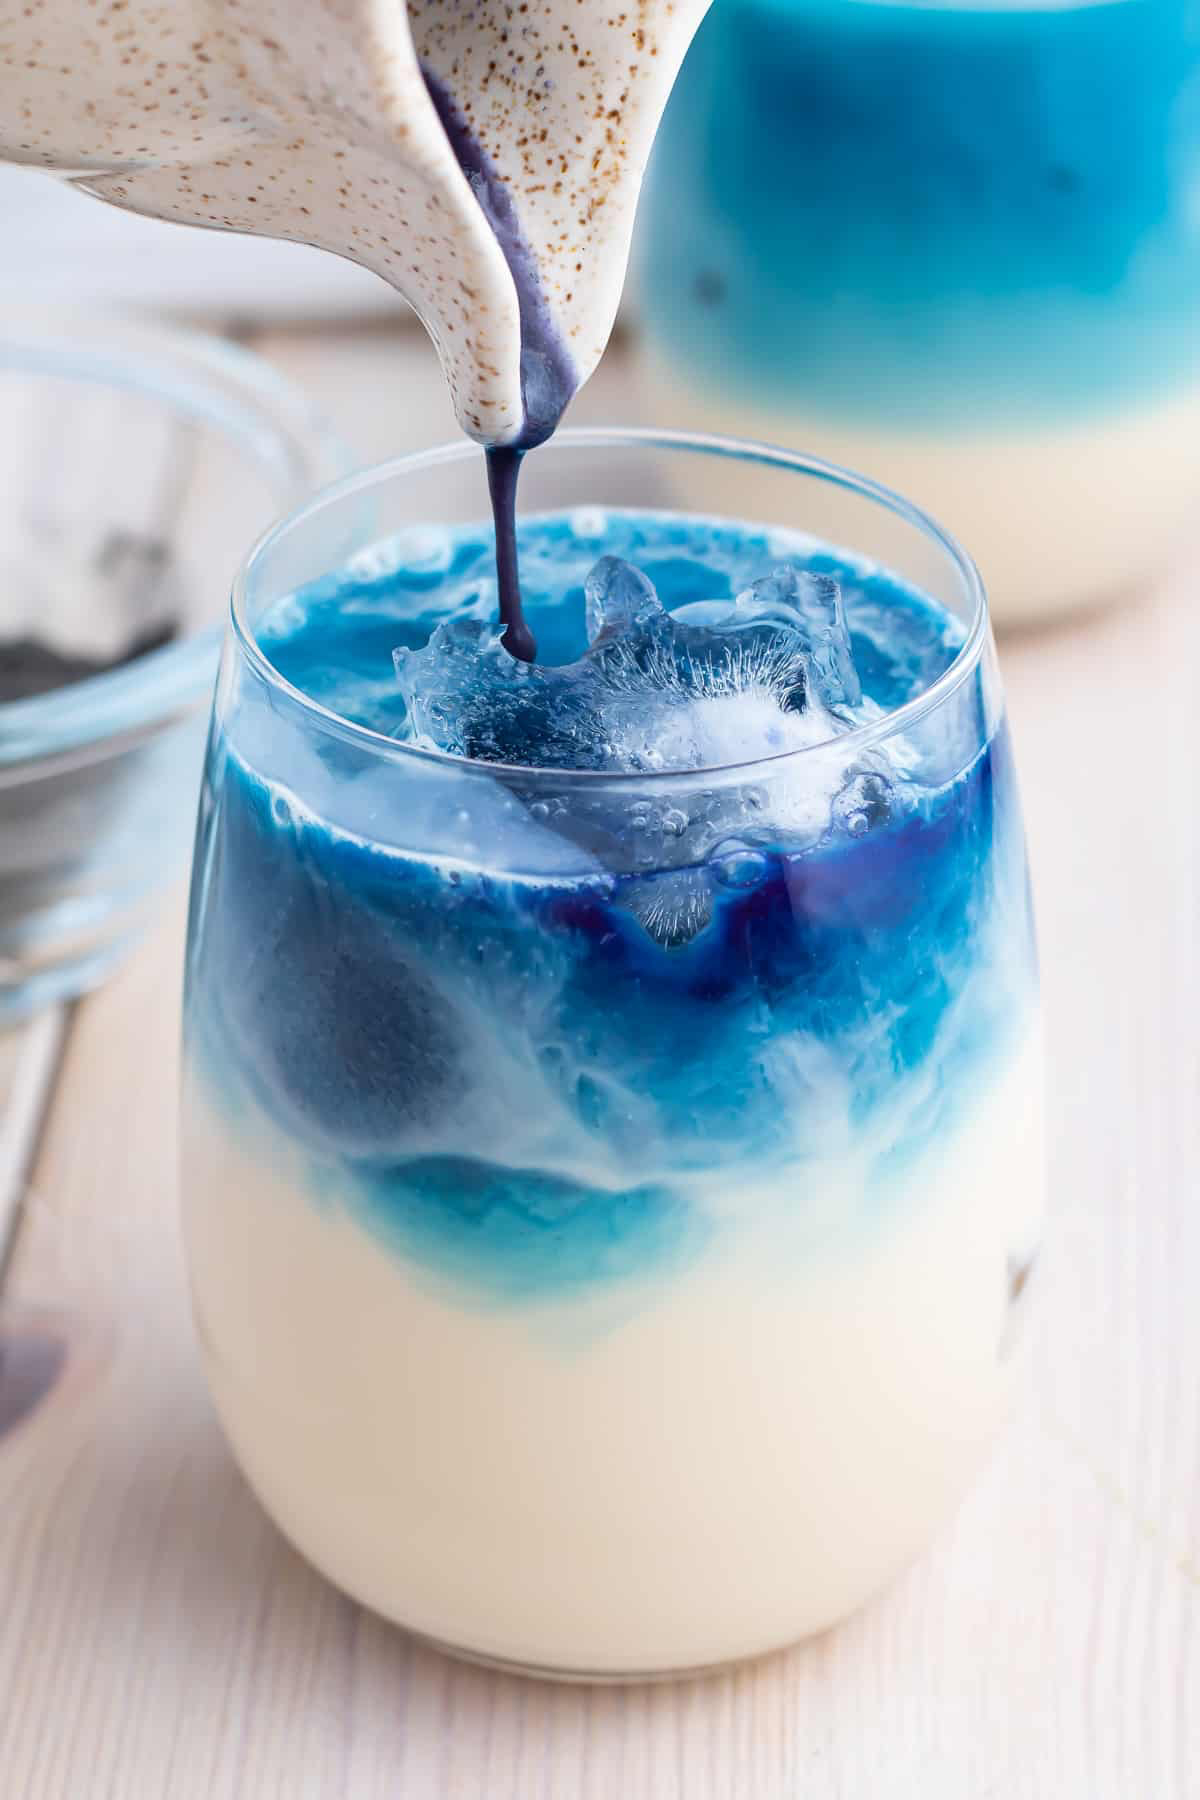 butterfly pea flower benefits for hair